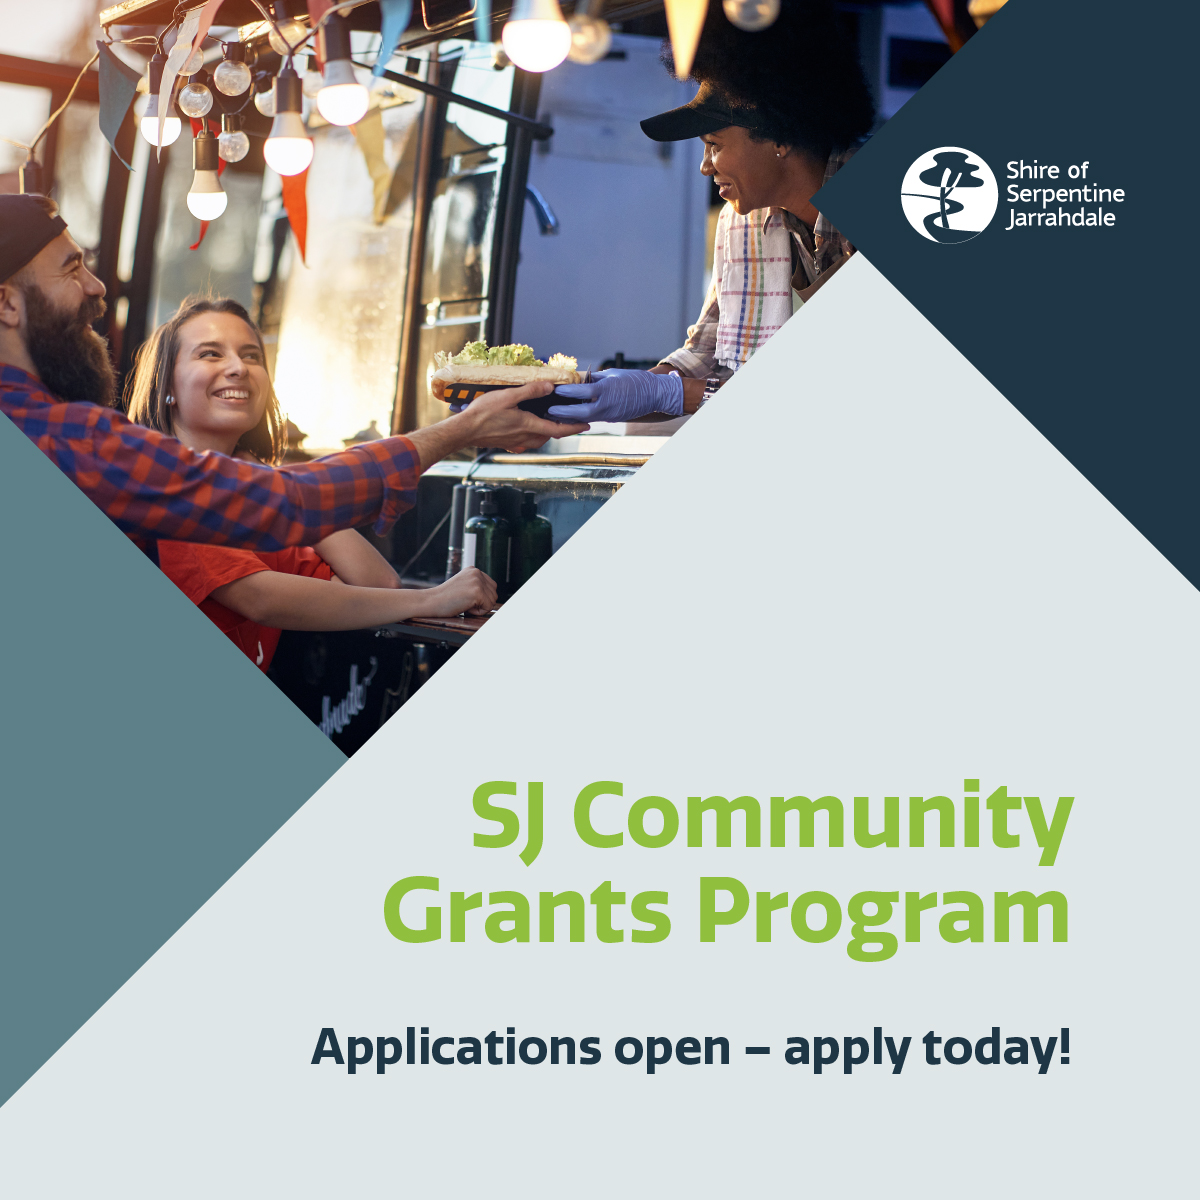 SJ Community Grants: Applications open now for February round